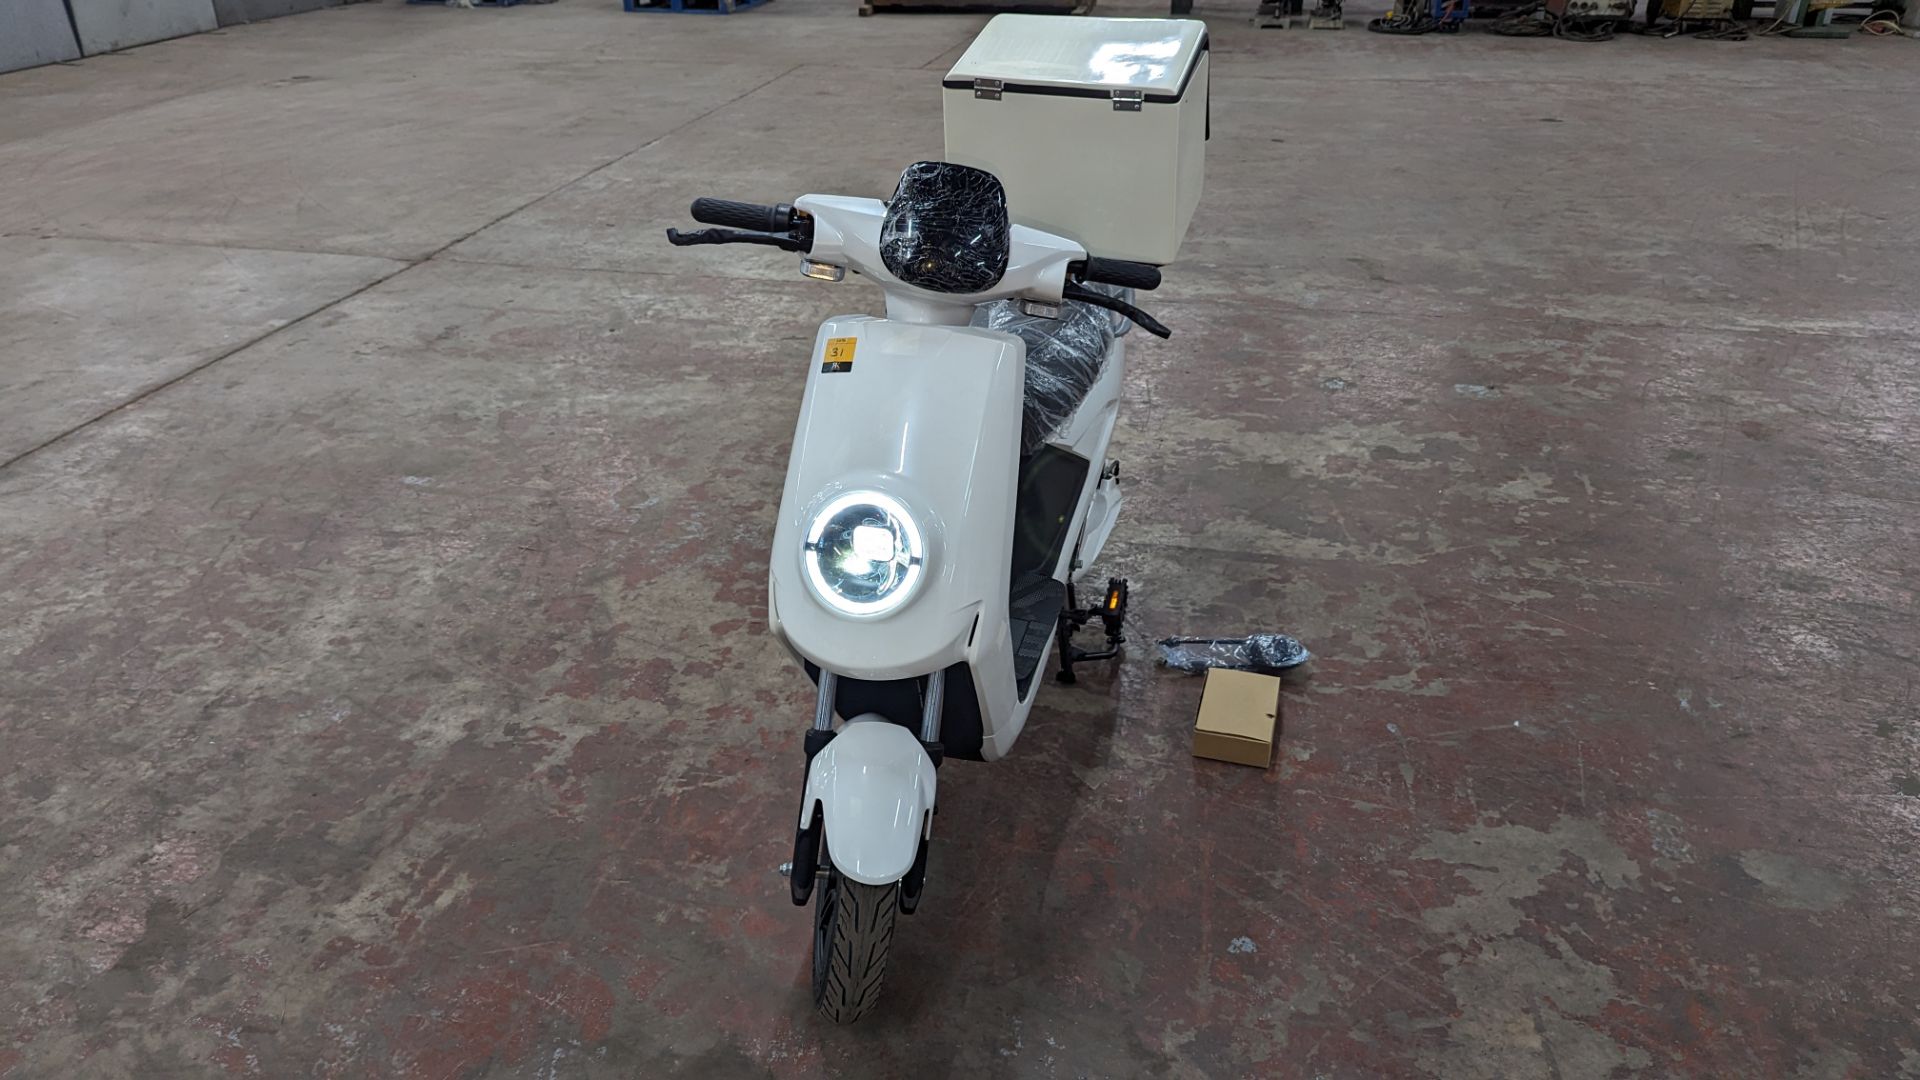 Model 18 Electric Bike: Zero (0) recorded miles, white body with black detailing, insulated box moun - Image 8 of 13